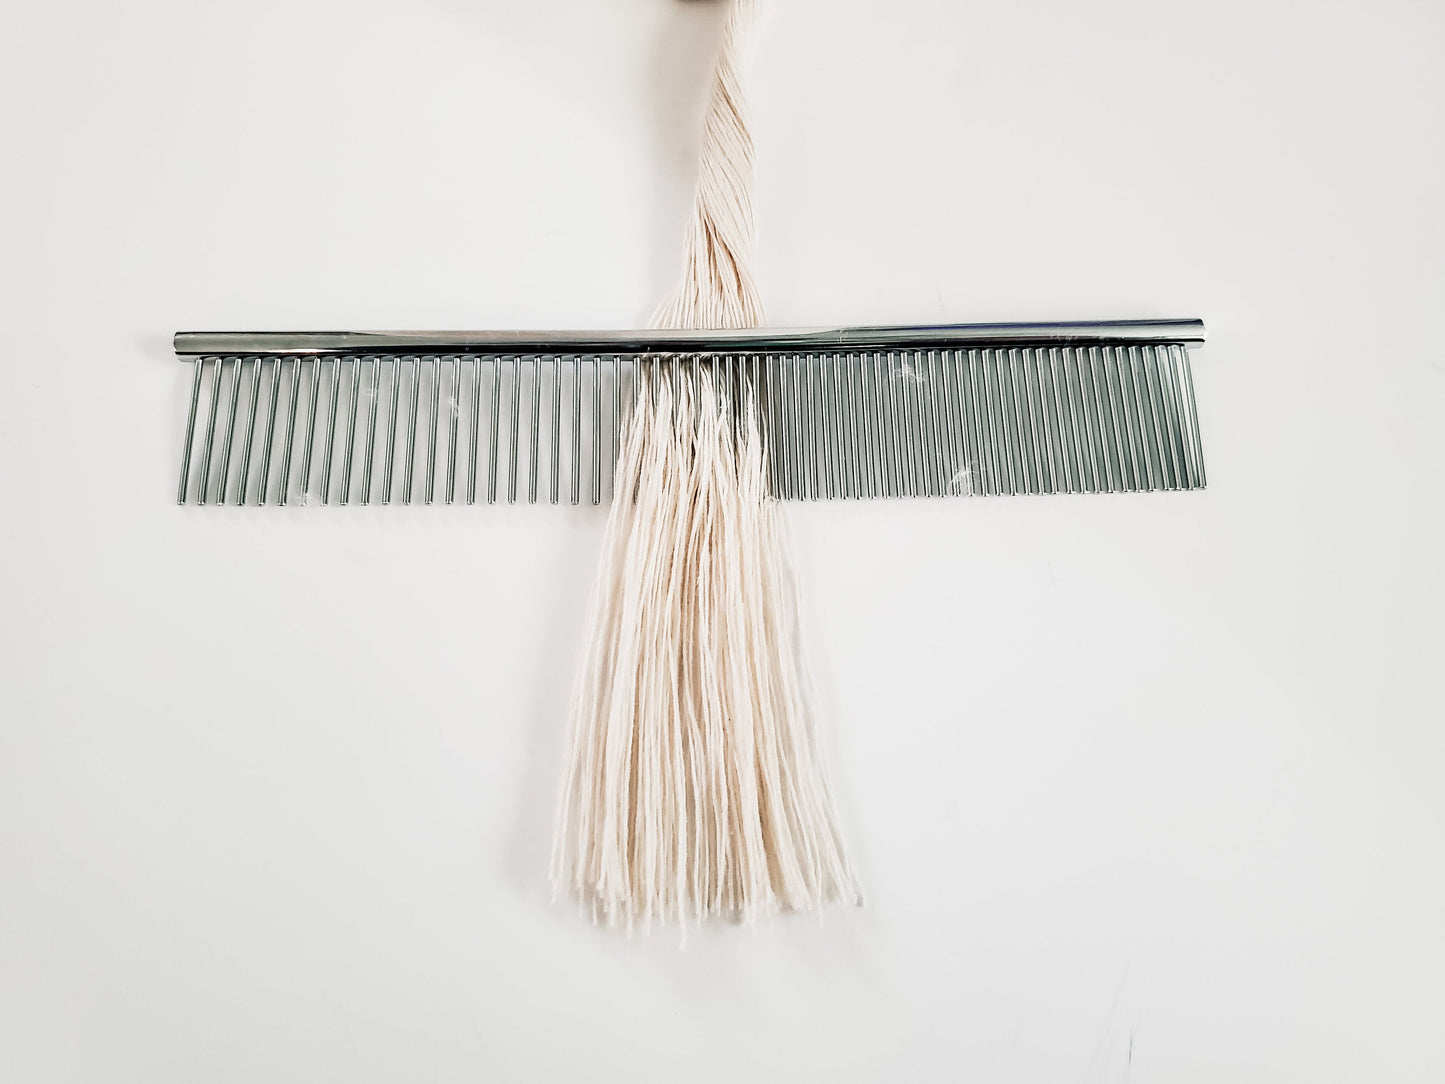 Stainless steel macrame combs. Duel sided fringe and tassels comb. durable macrame supplies.